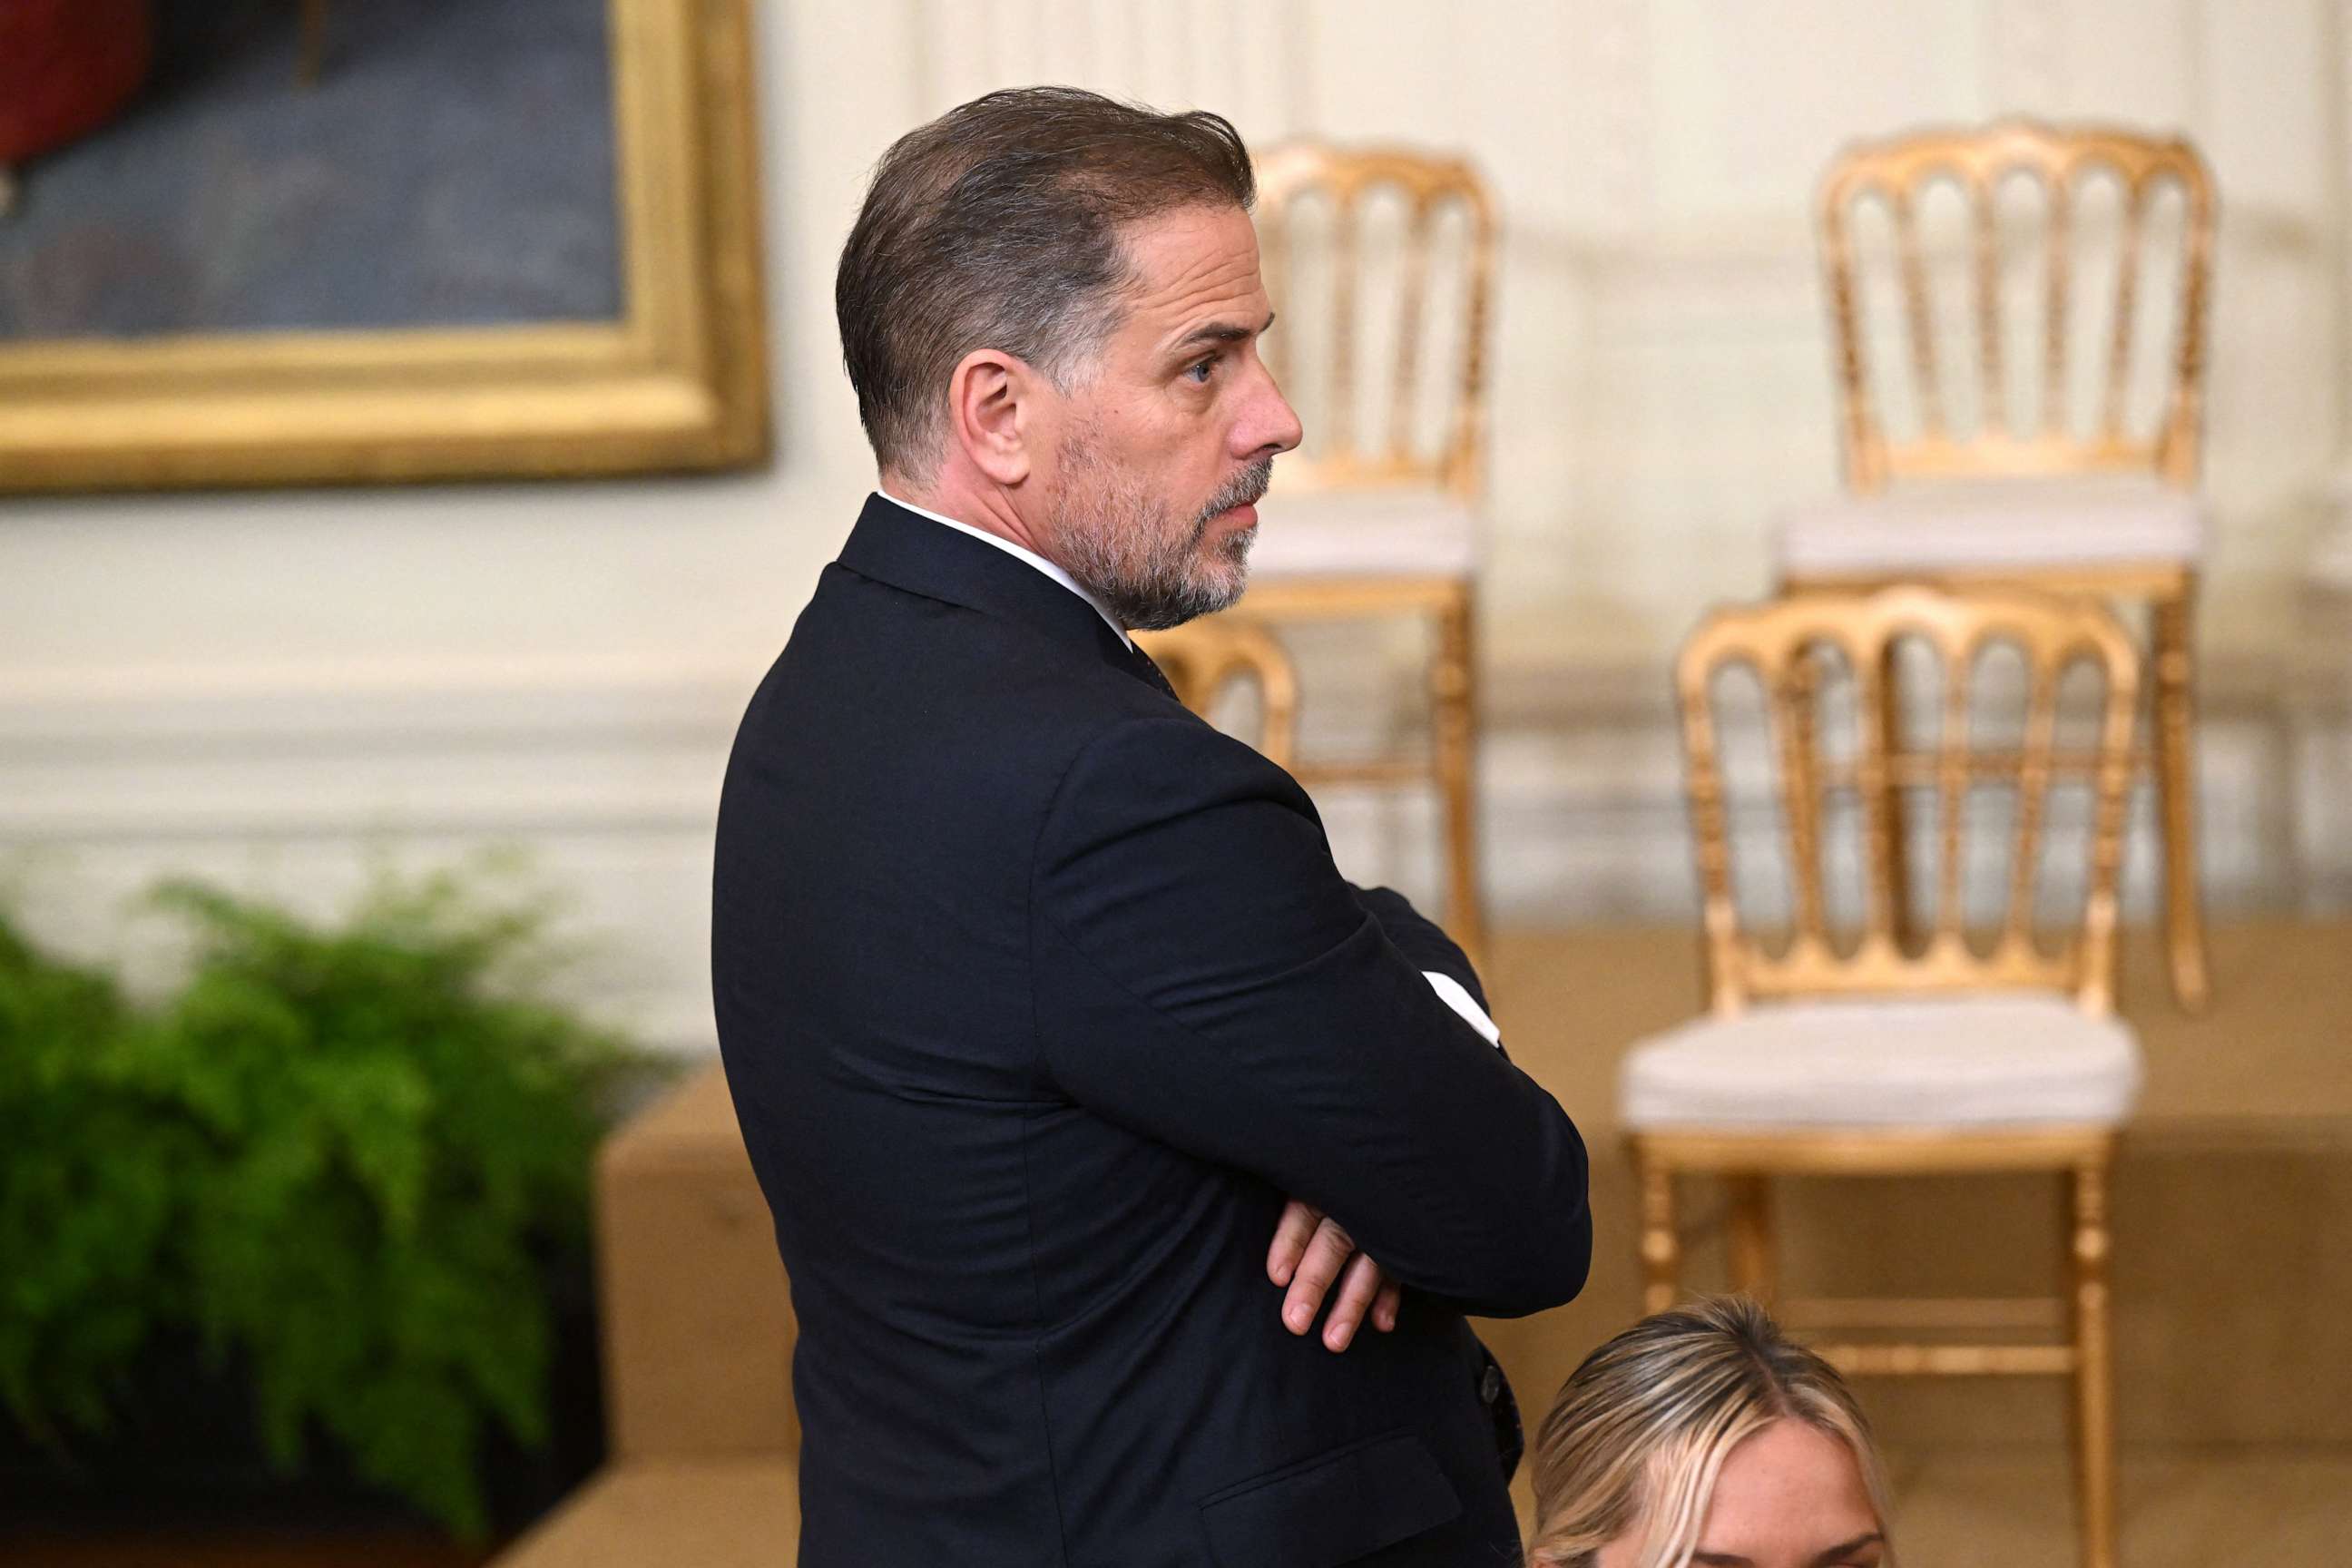 PHOTO: Hunter Biden attends a Presidential Medal of Freedom ceremony honoring 17 recipients, in the East Room of the White House in Washington, DC, July 7, 2022.